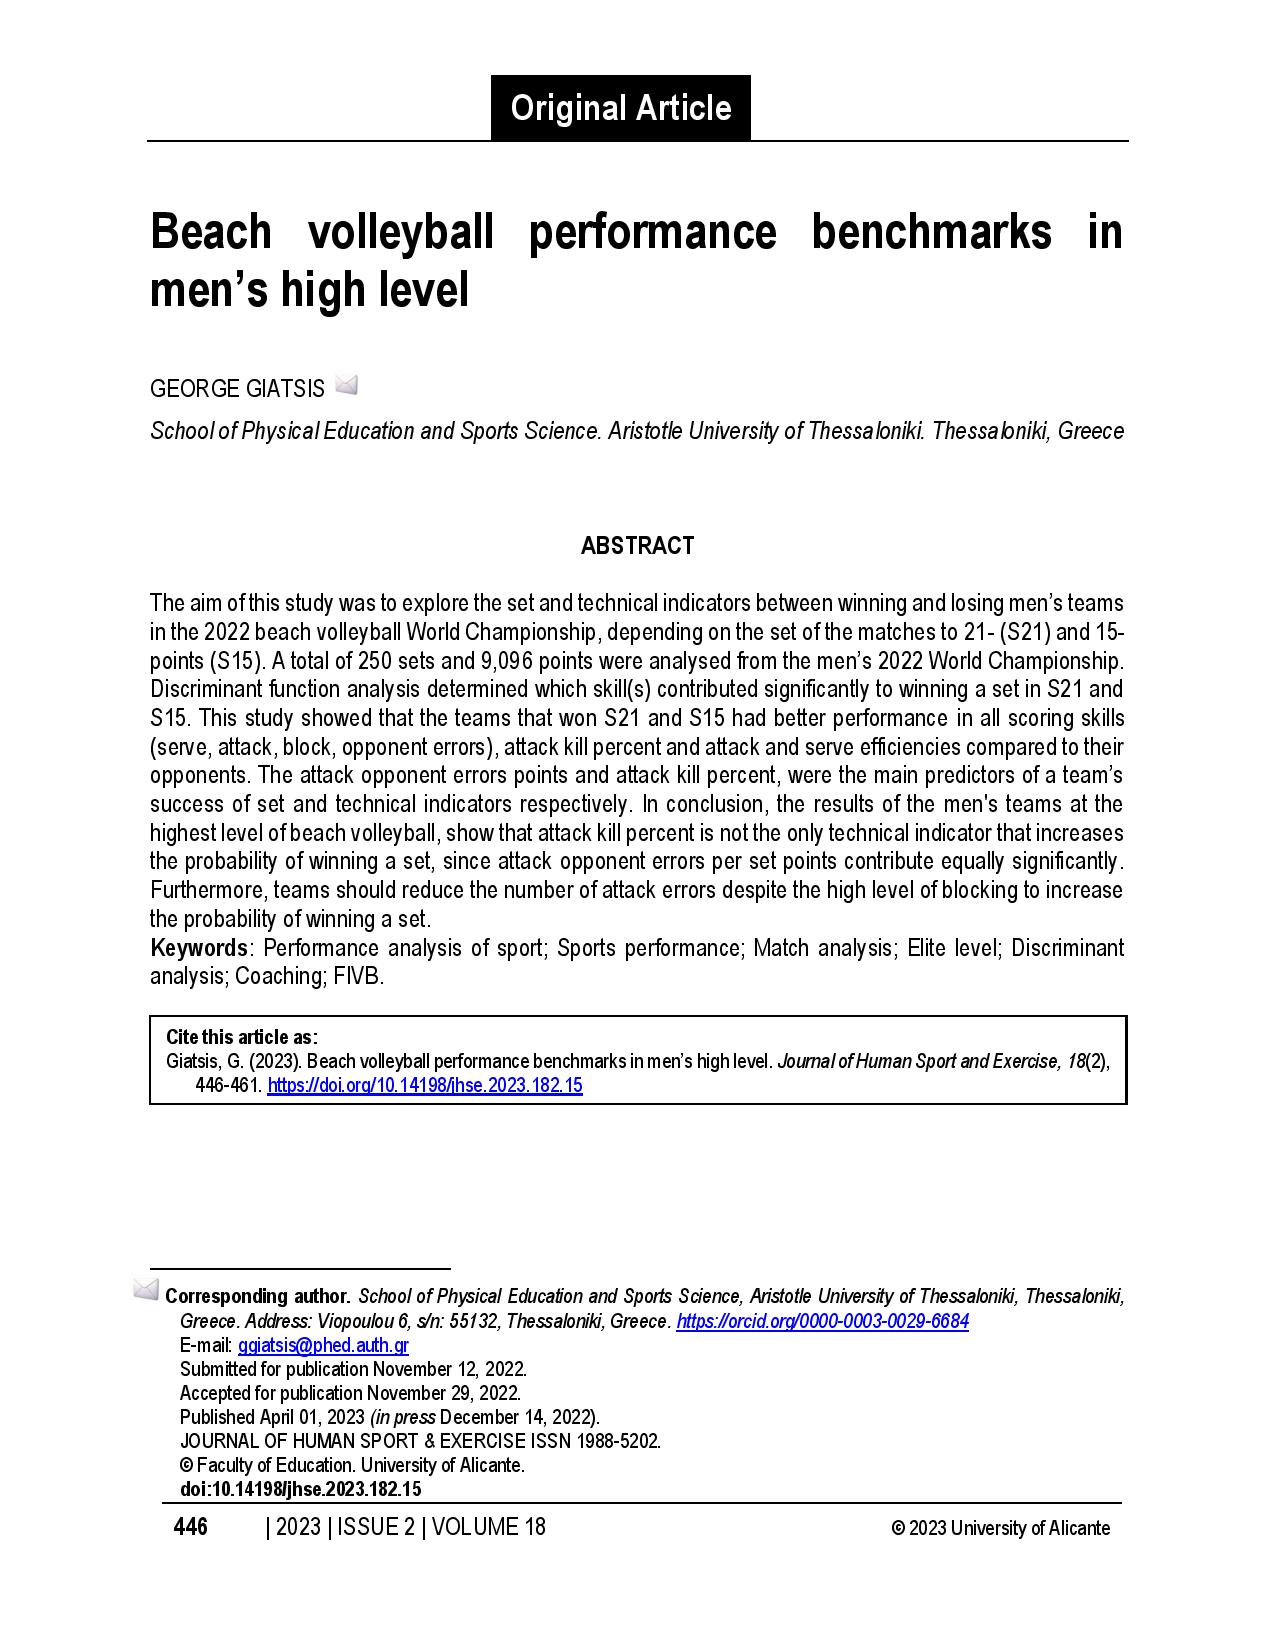 Beach volleyball performance benchmarks in men’s high level